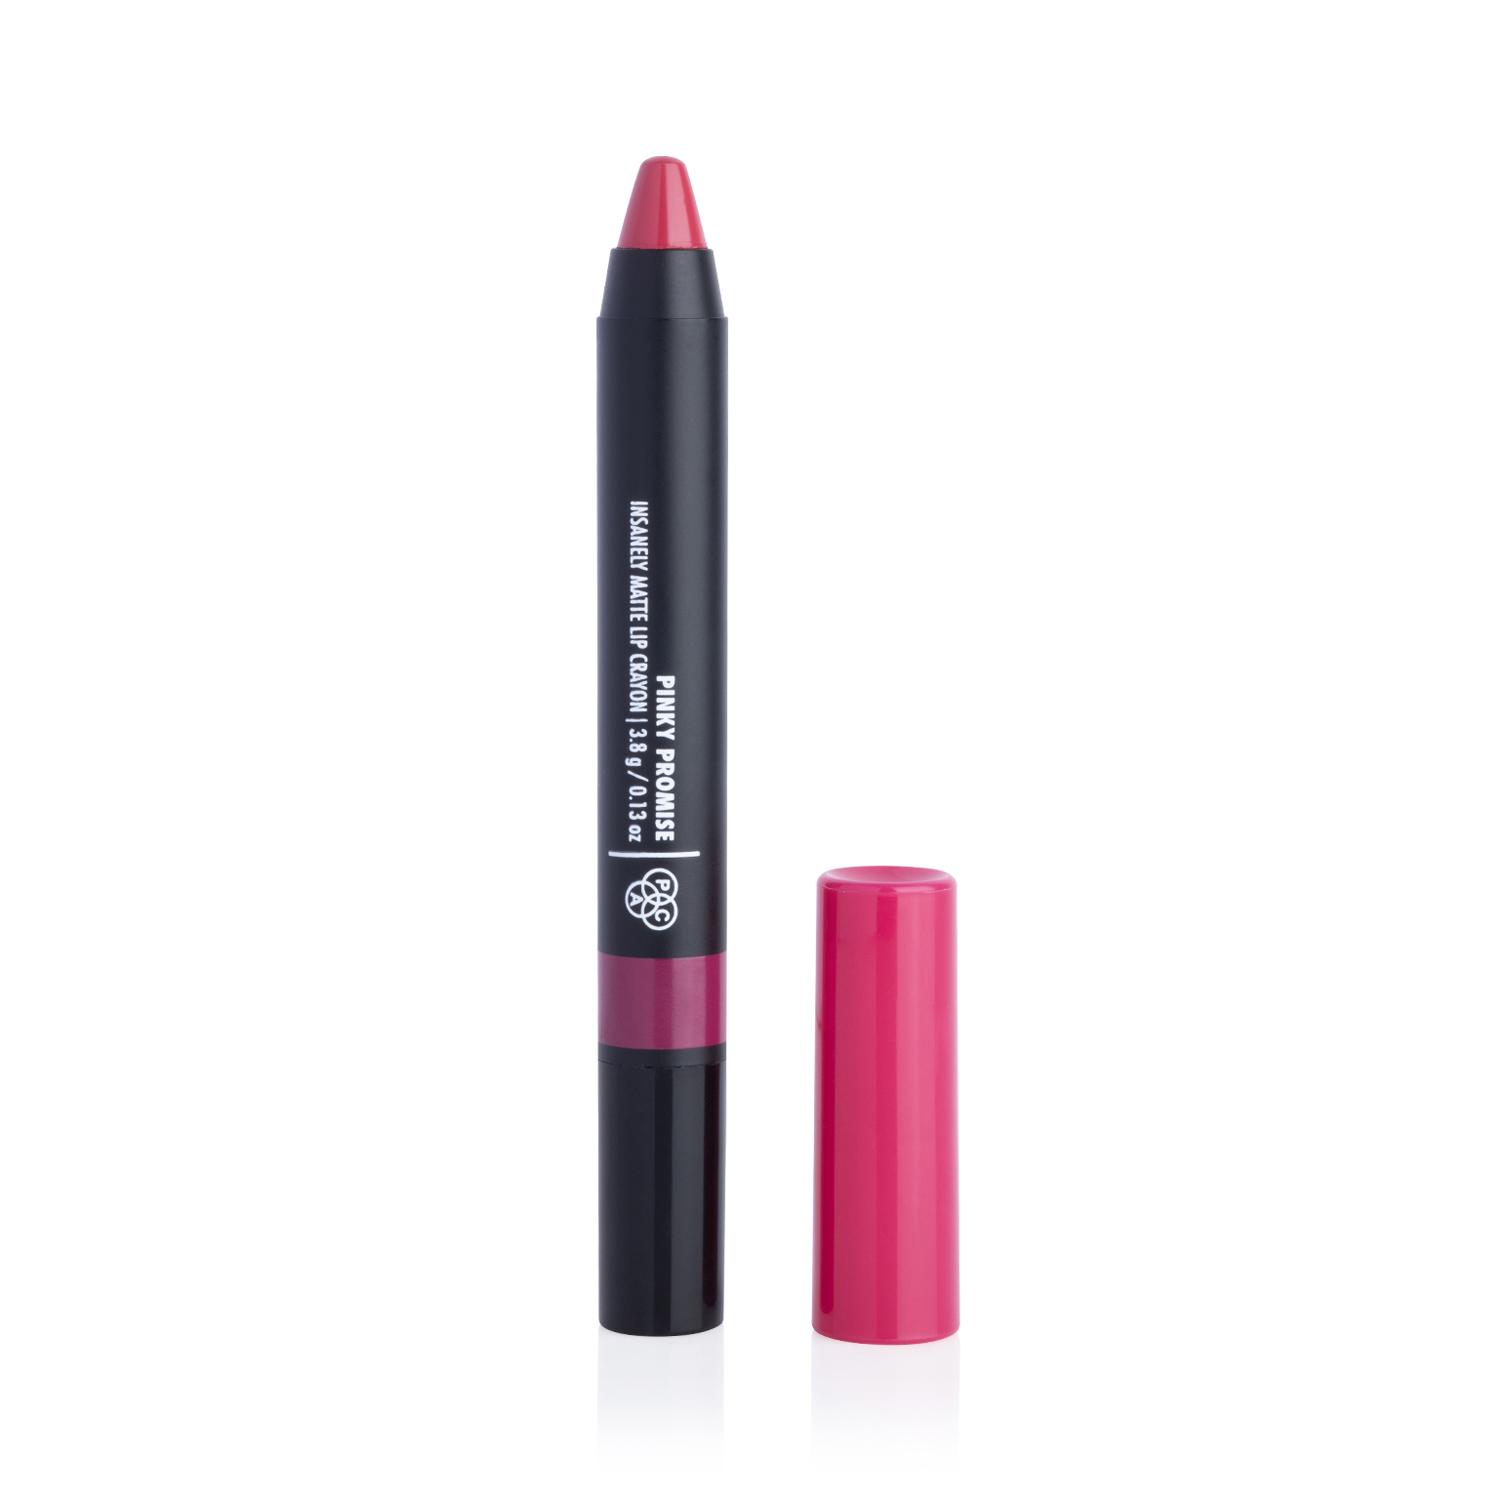 PAC | PAC Insanely Matte Lip Crayon - Pinky Promise (3.8g)